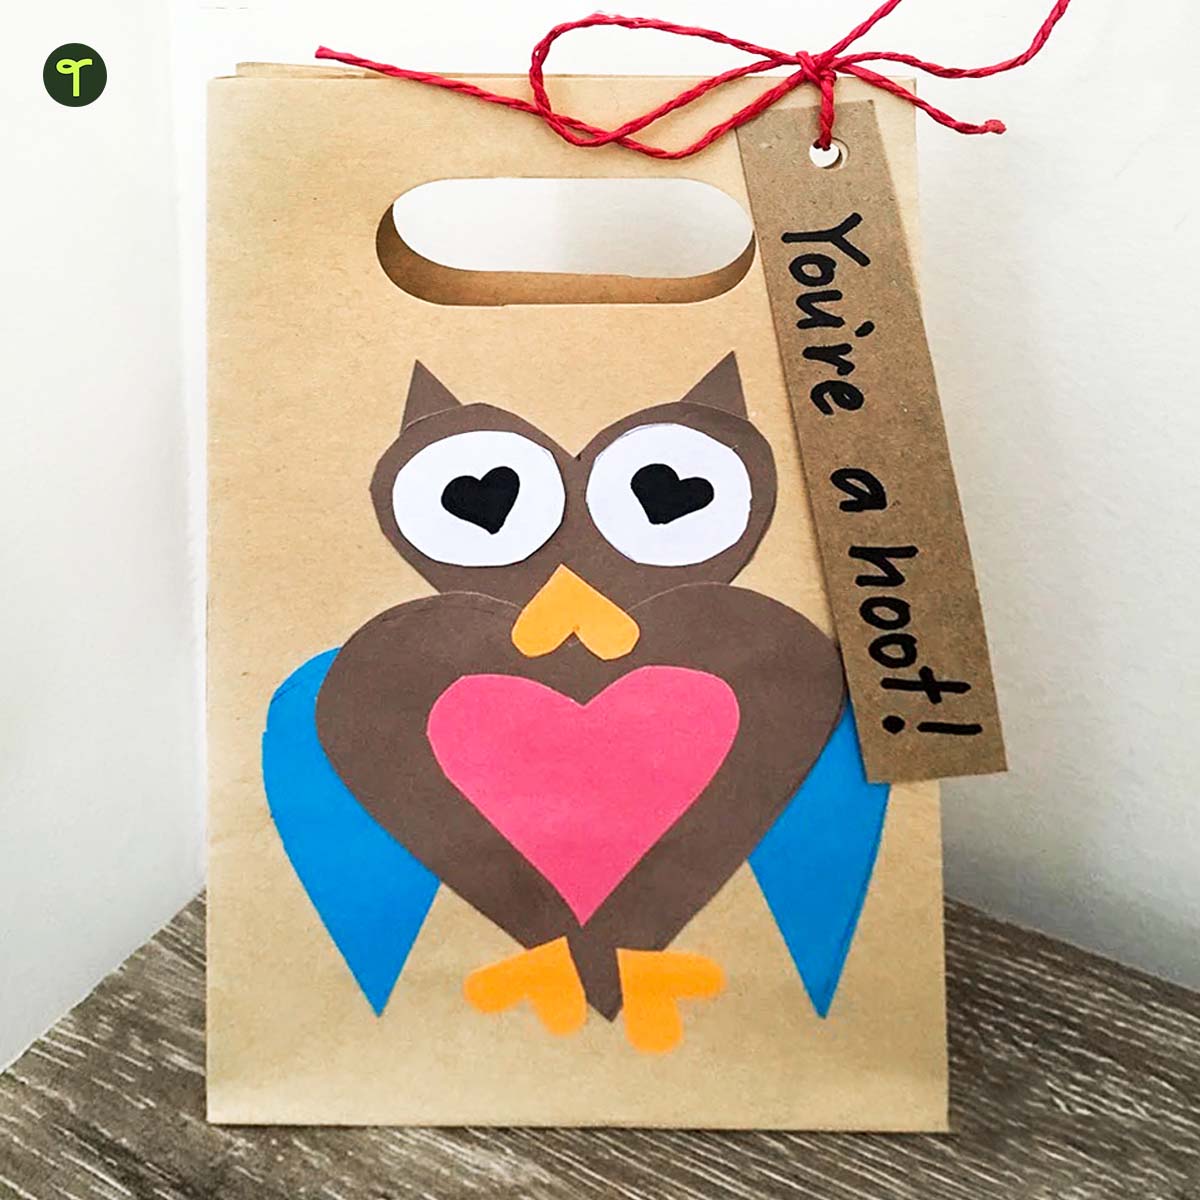 Valentine's day bag with owl design for kids to collect cards